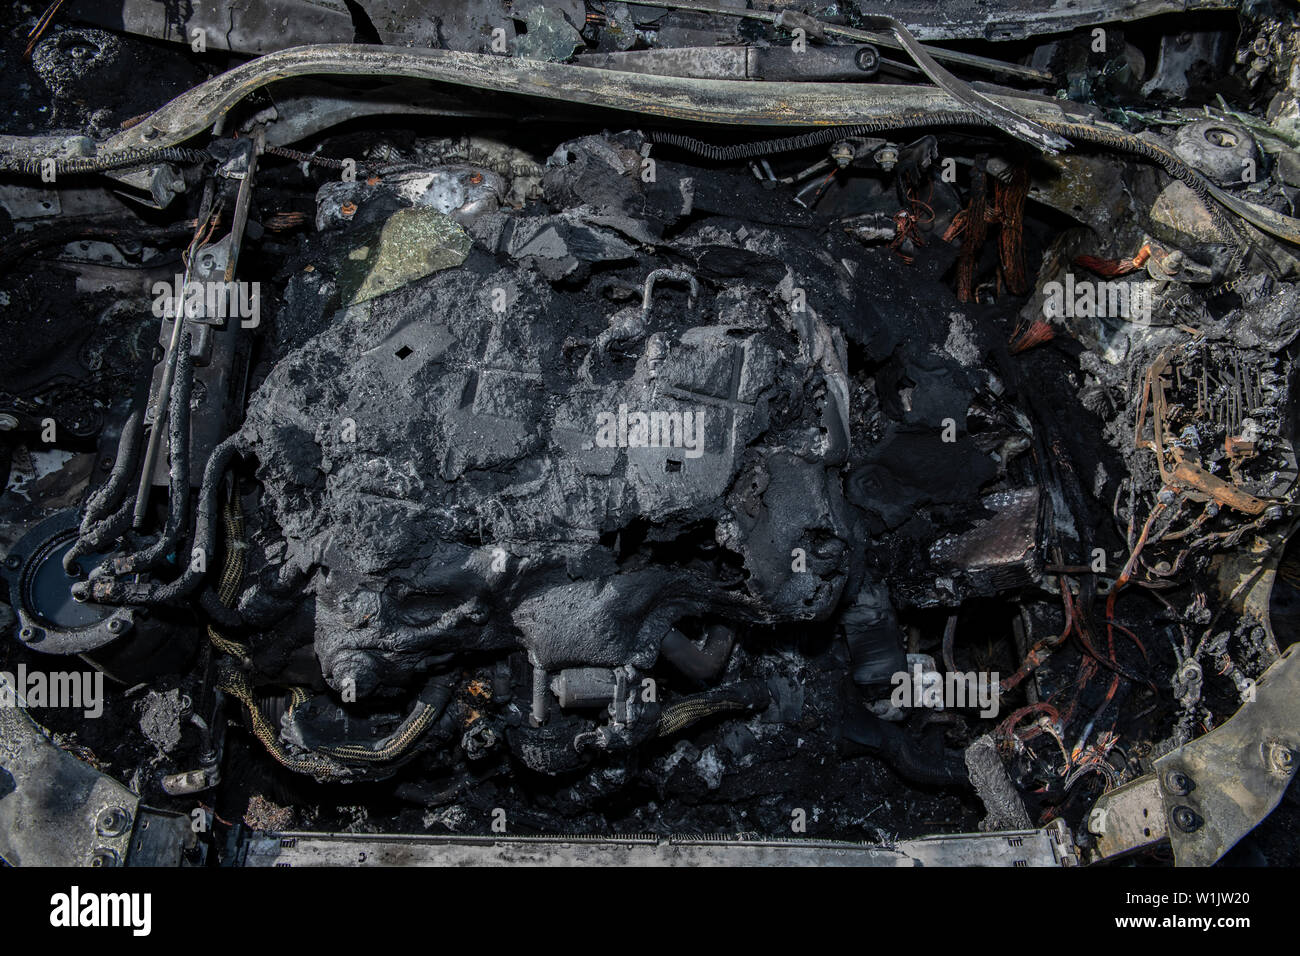 Berlin, Germany. 03rd July, 2019. The engine block of a car in the Hansaviertel on Bartningallee has burnt out. A total of five cars were set on fire there during the night. The police are assuming arson. Last night, six vehicles were already on fire in Berlin. Credit: Paul Zinken/dpa/Alamy Live News Stock Photo